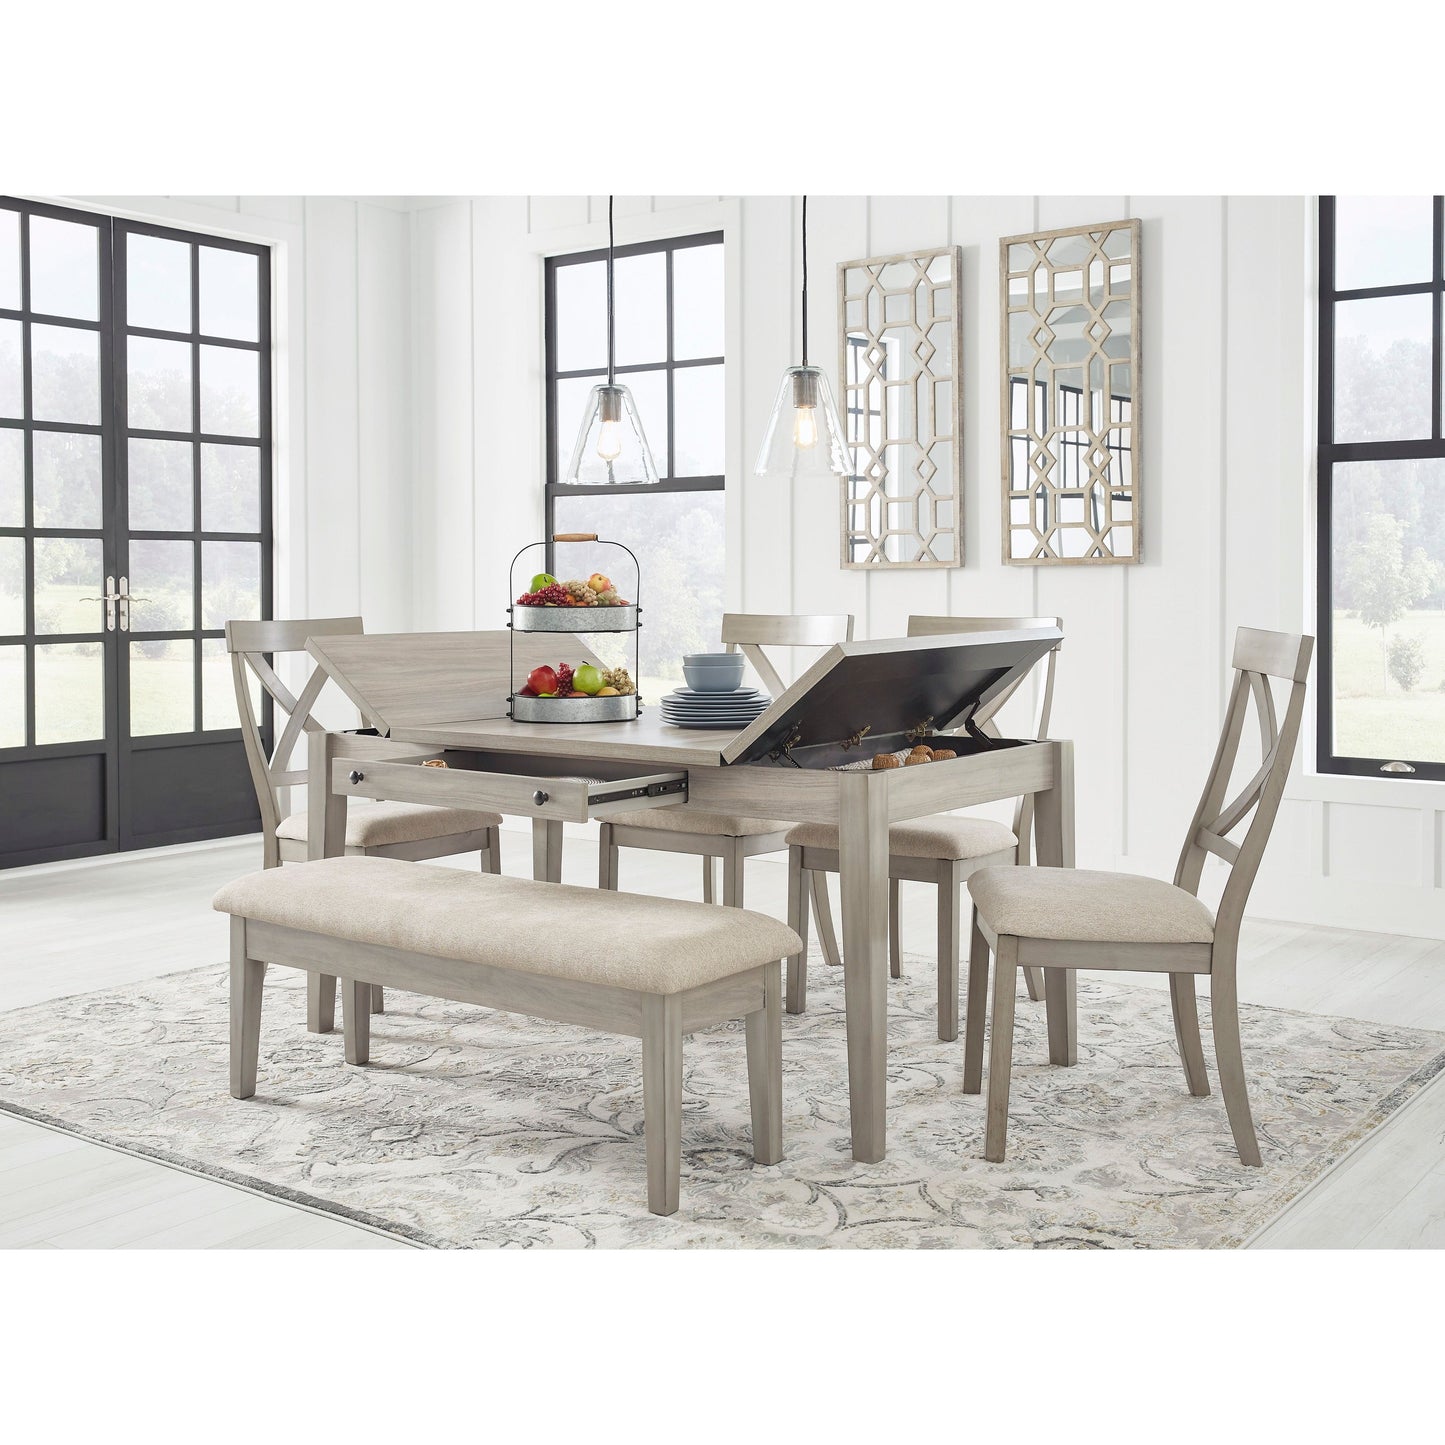 PARELLEN DINING SET - 4 CHAIRS, TABLE & BENCH